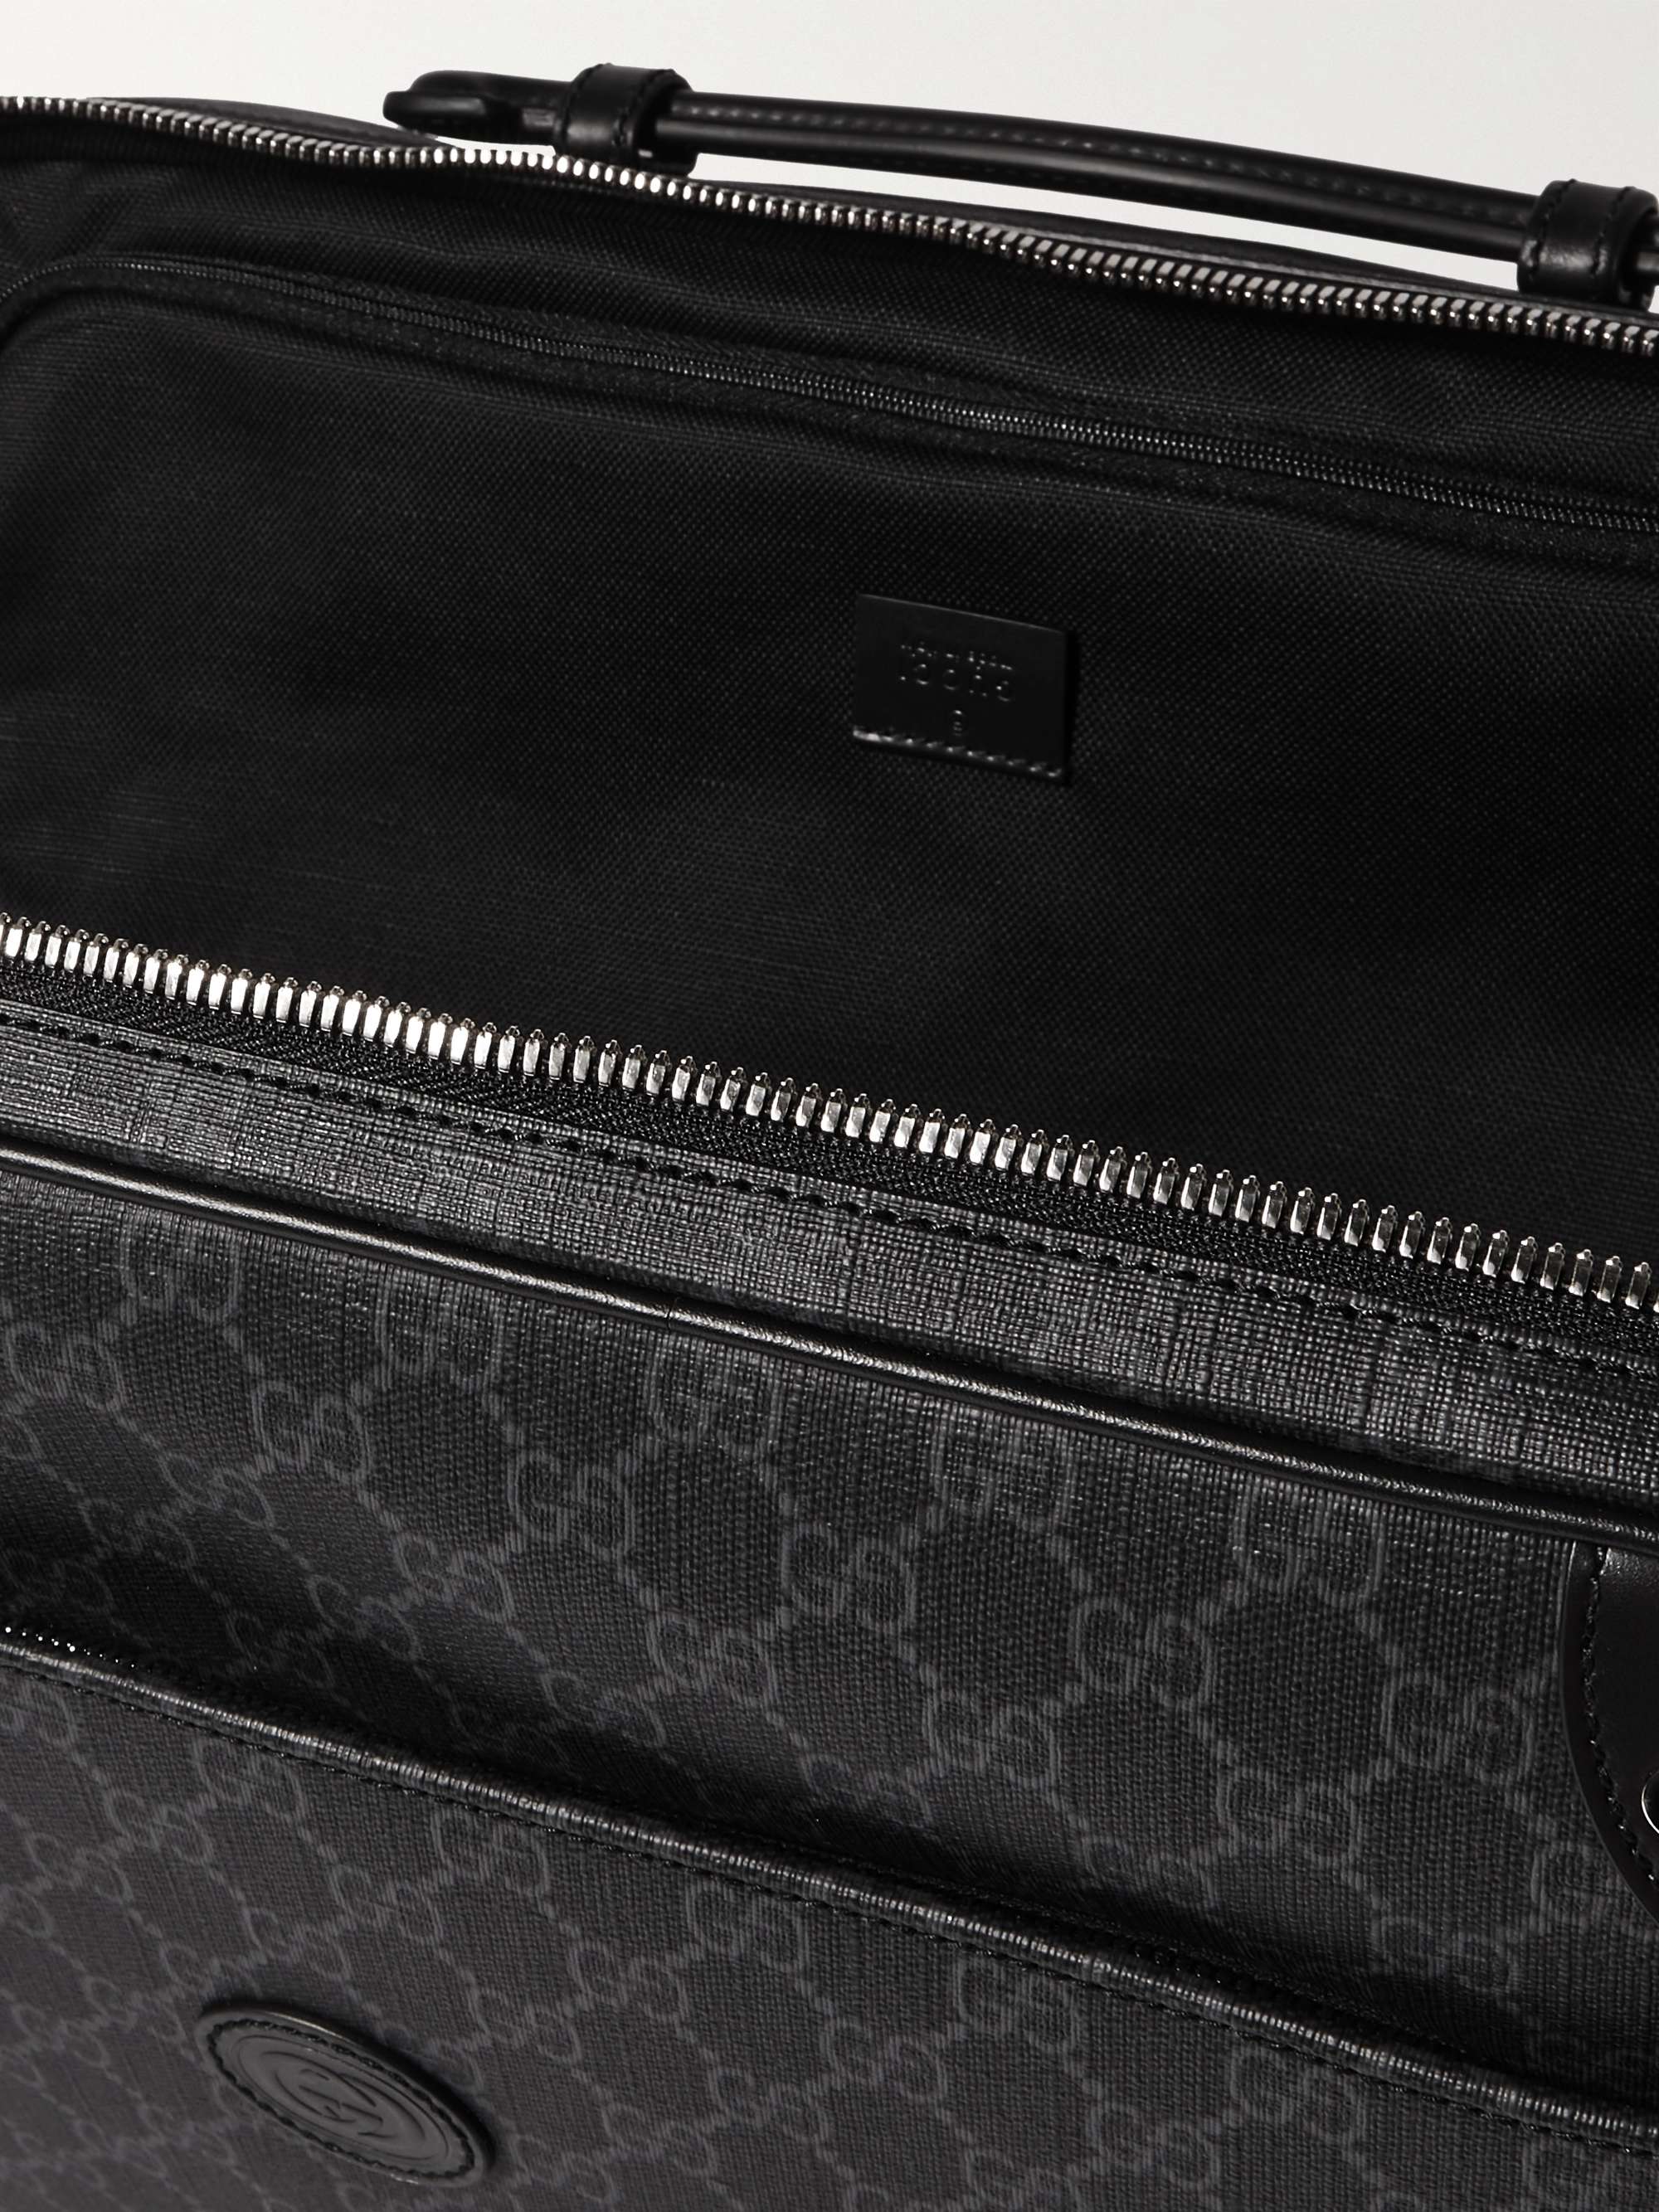 GUCCI Leather-Trimmed Monogrammed Coated-Canvas Briefcase